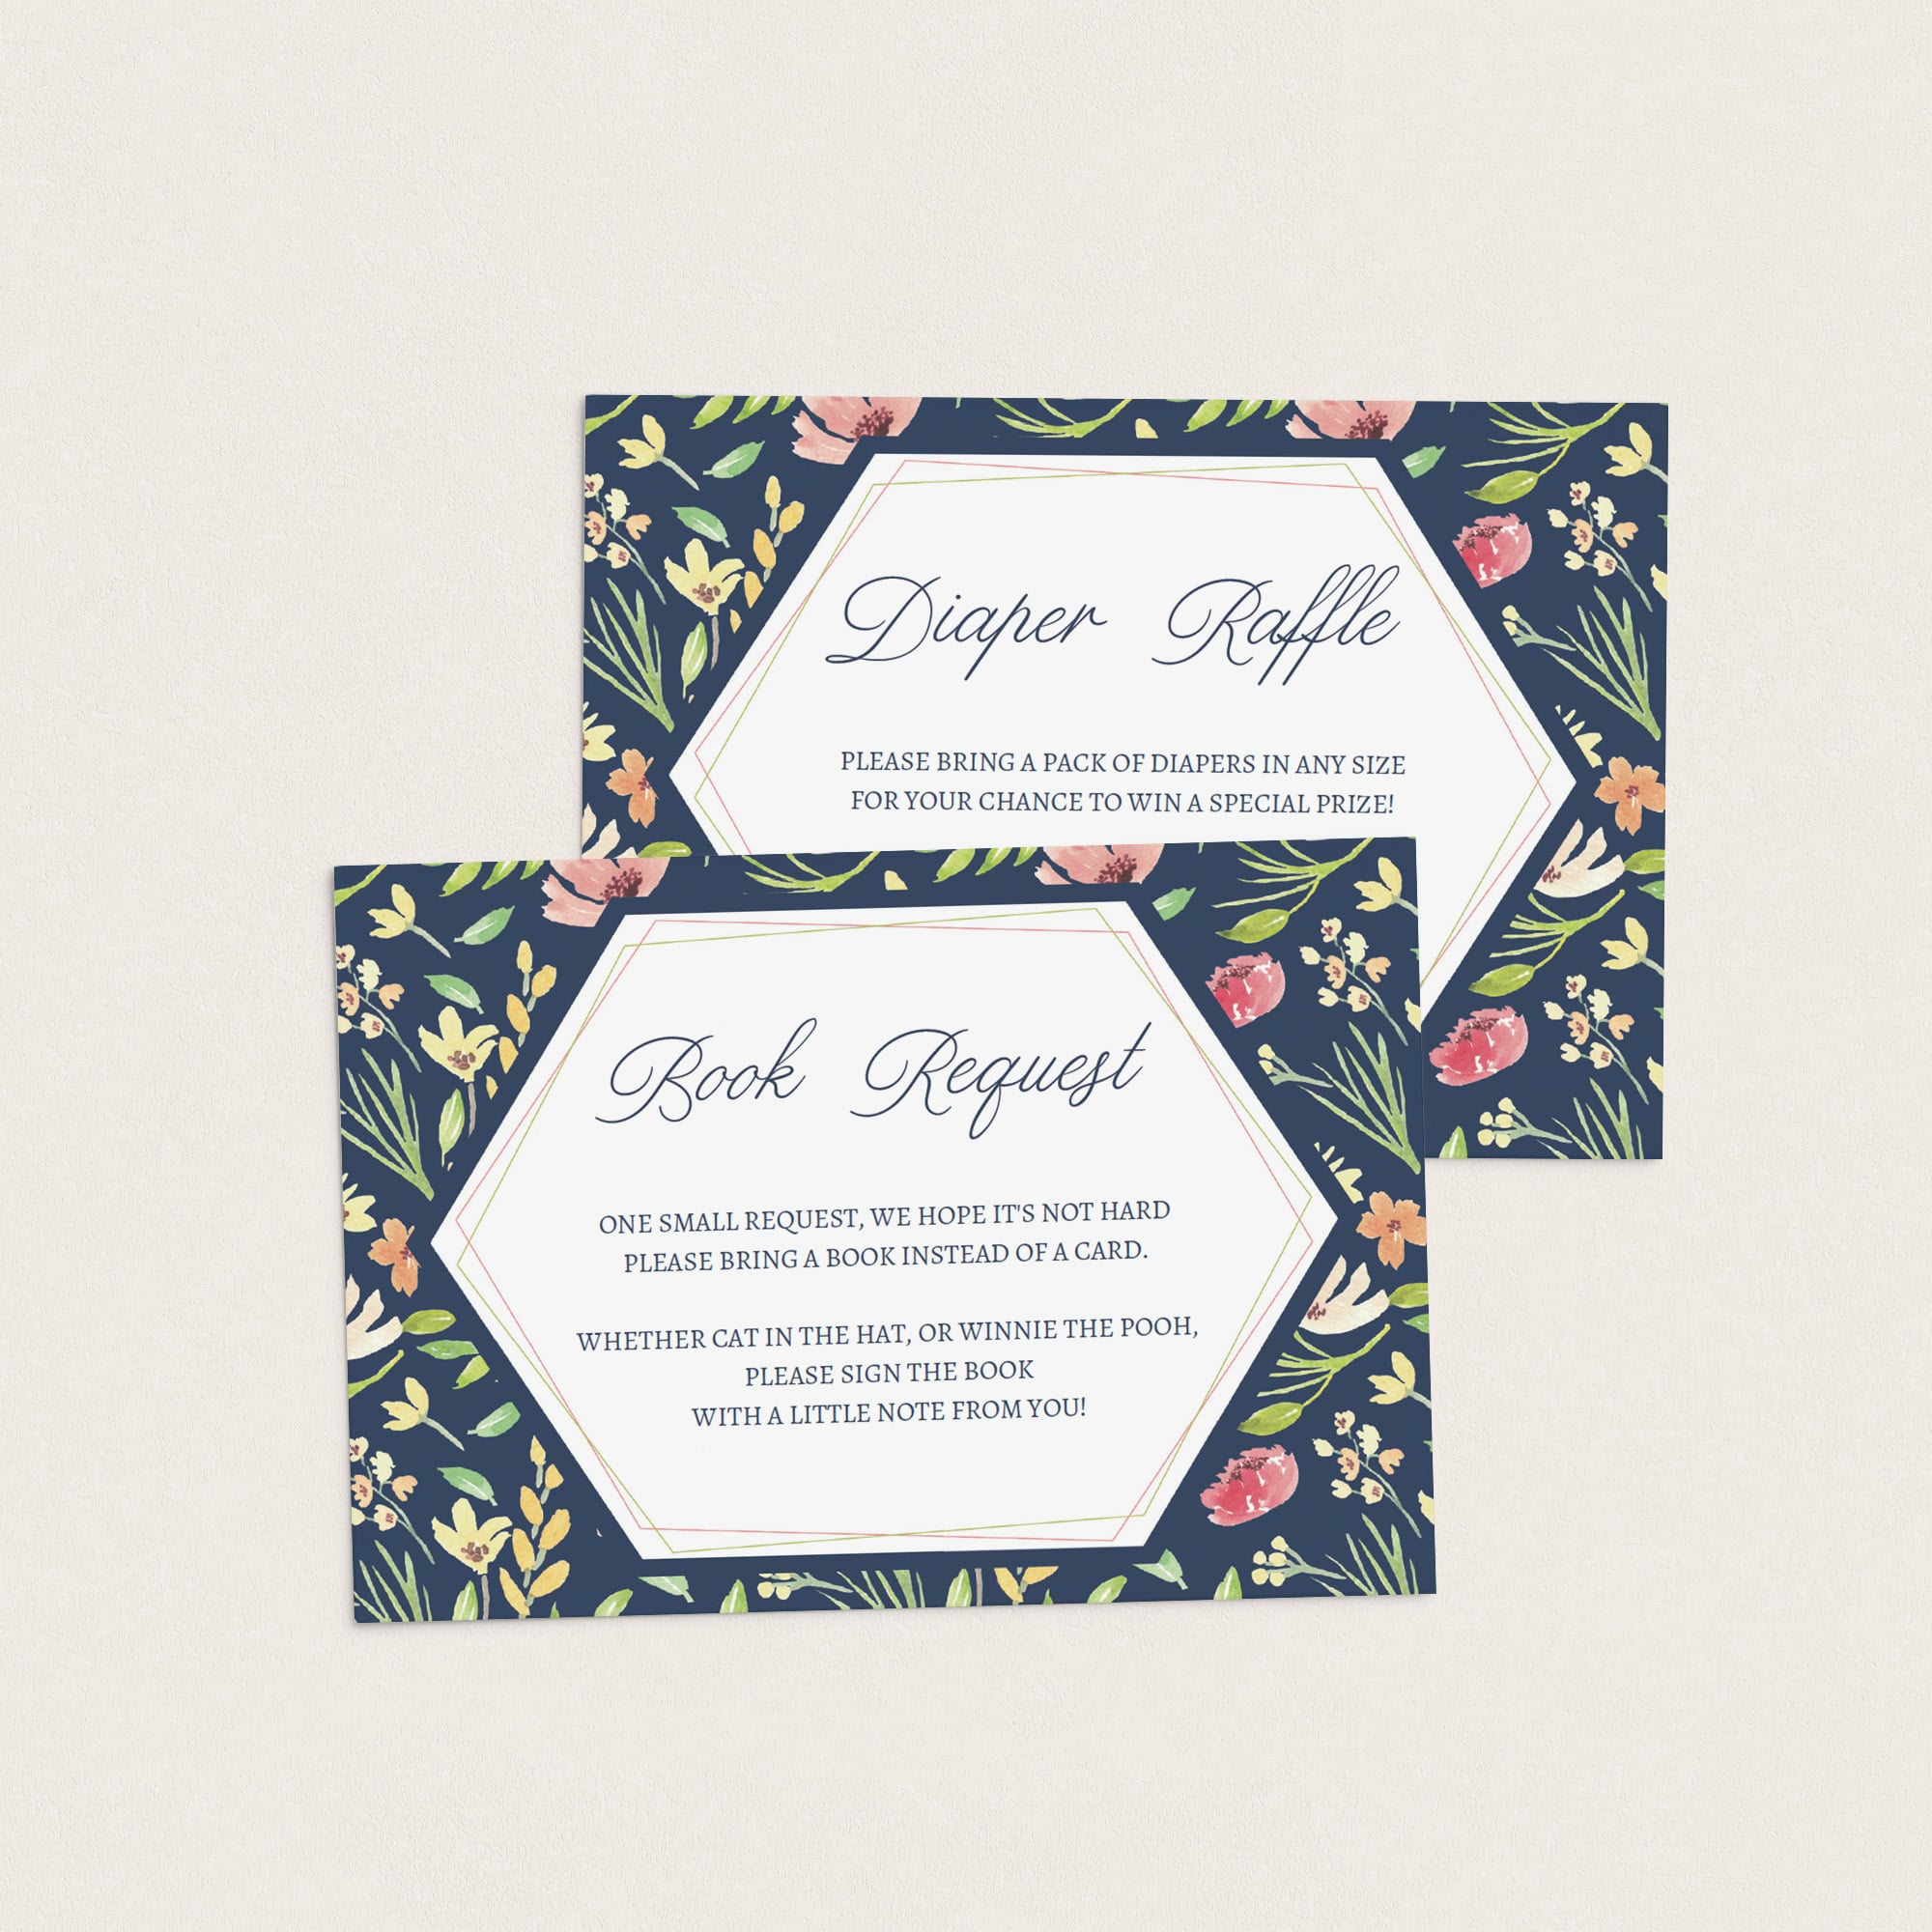 Invitation inserts for floral baby shower party pink navy and green by LittleSizzle